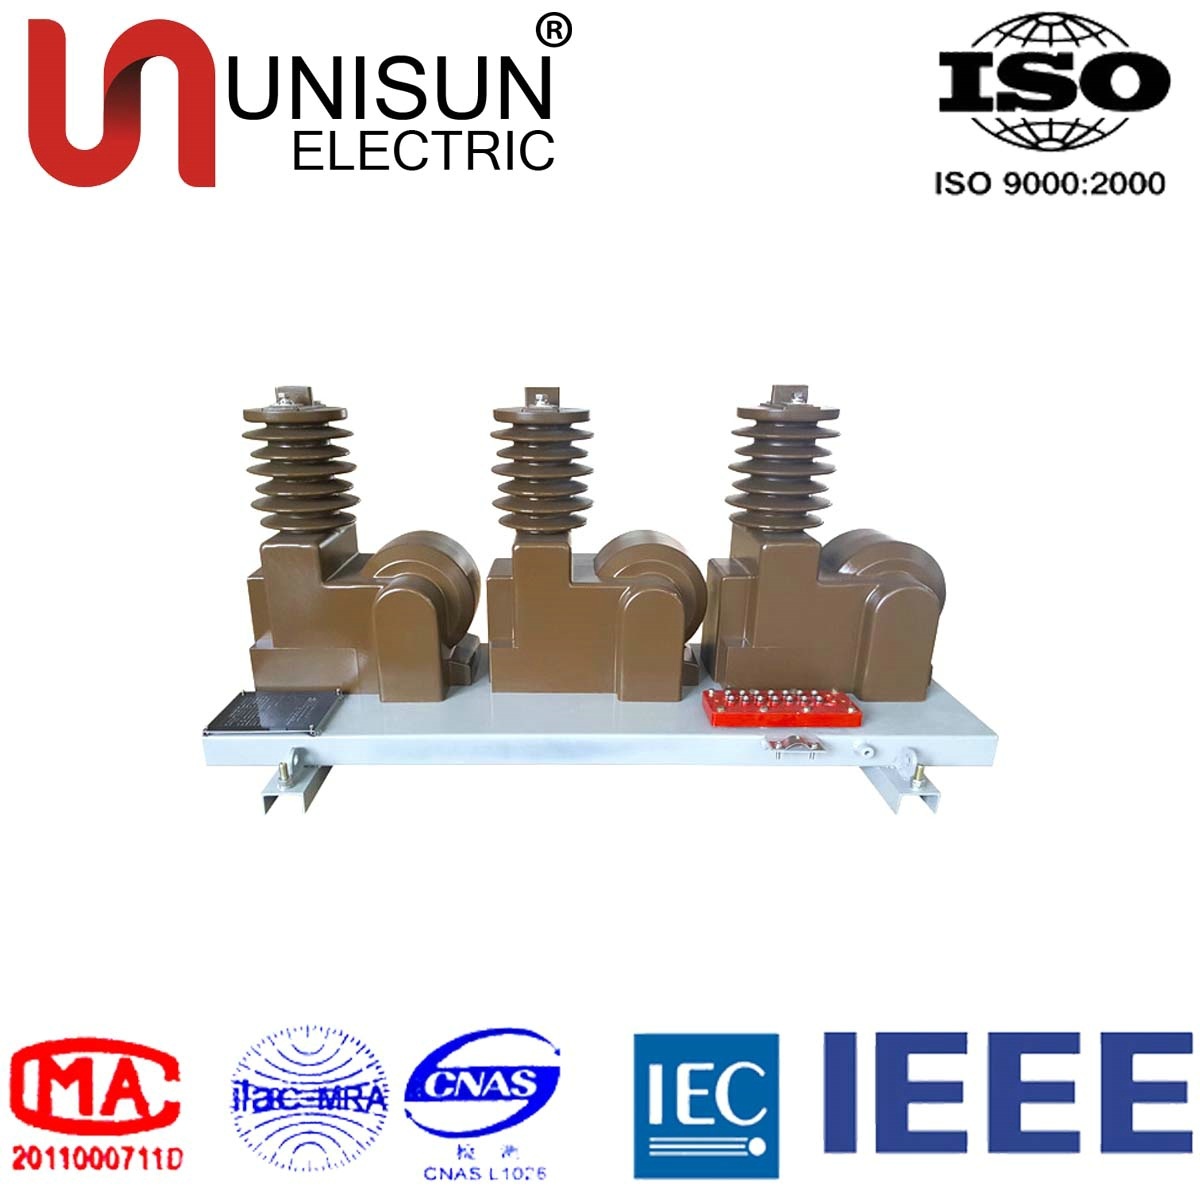 Current and Potential Metering Transformer